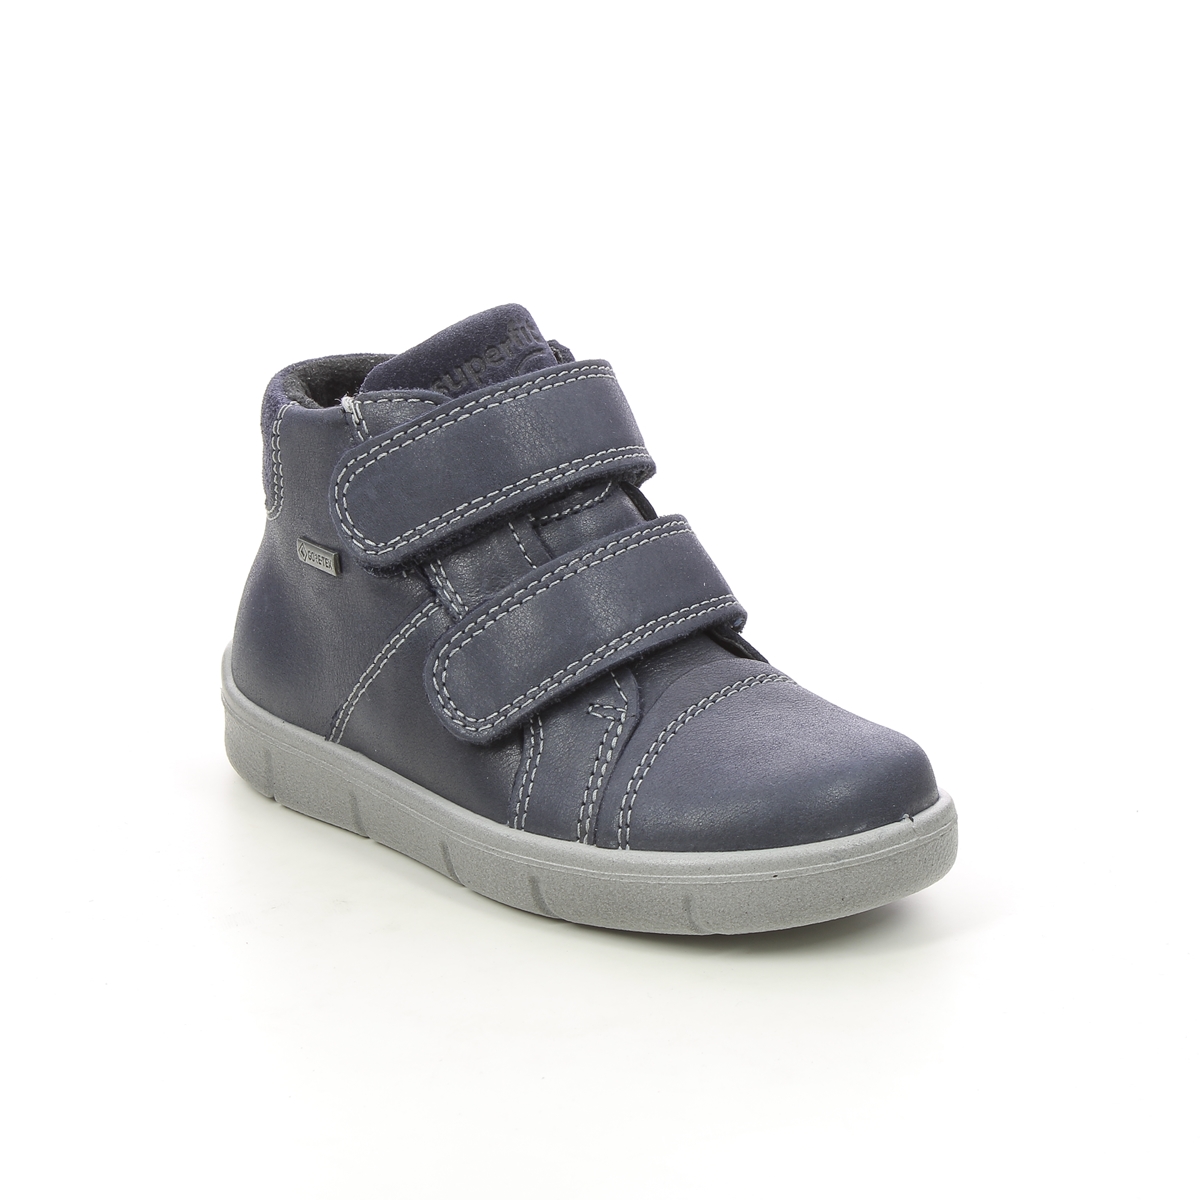 Superfit Ulli 2V Gtx Navy Leather Kids Toddler Boys Boots 0800423-8000 In Size 28 In Plain Navy Leather